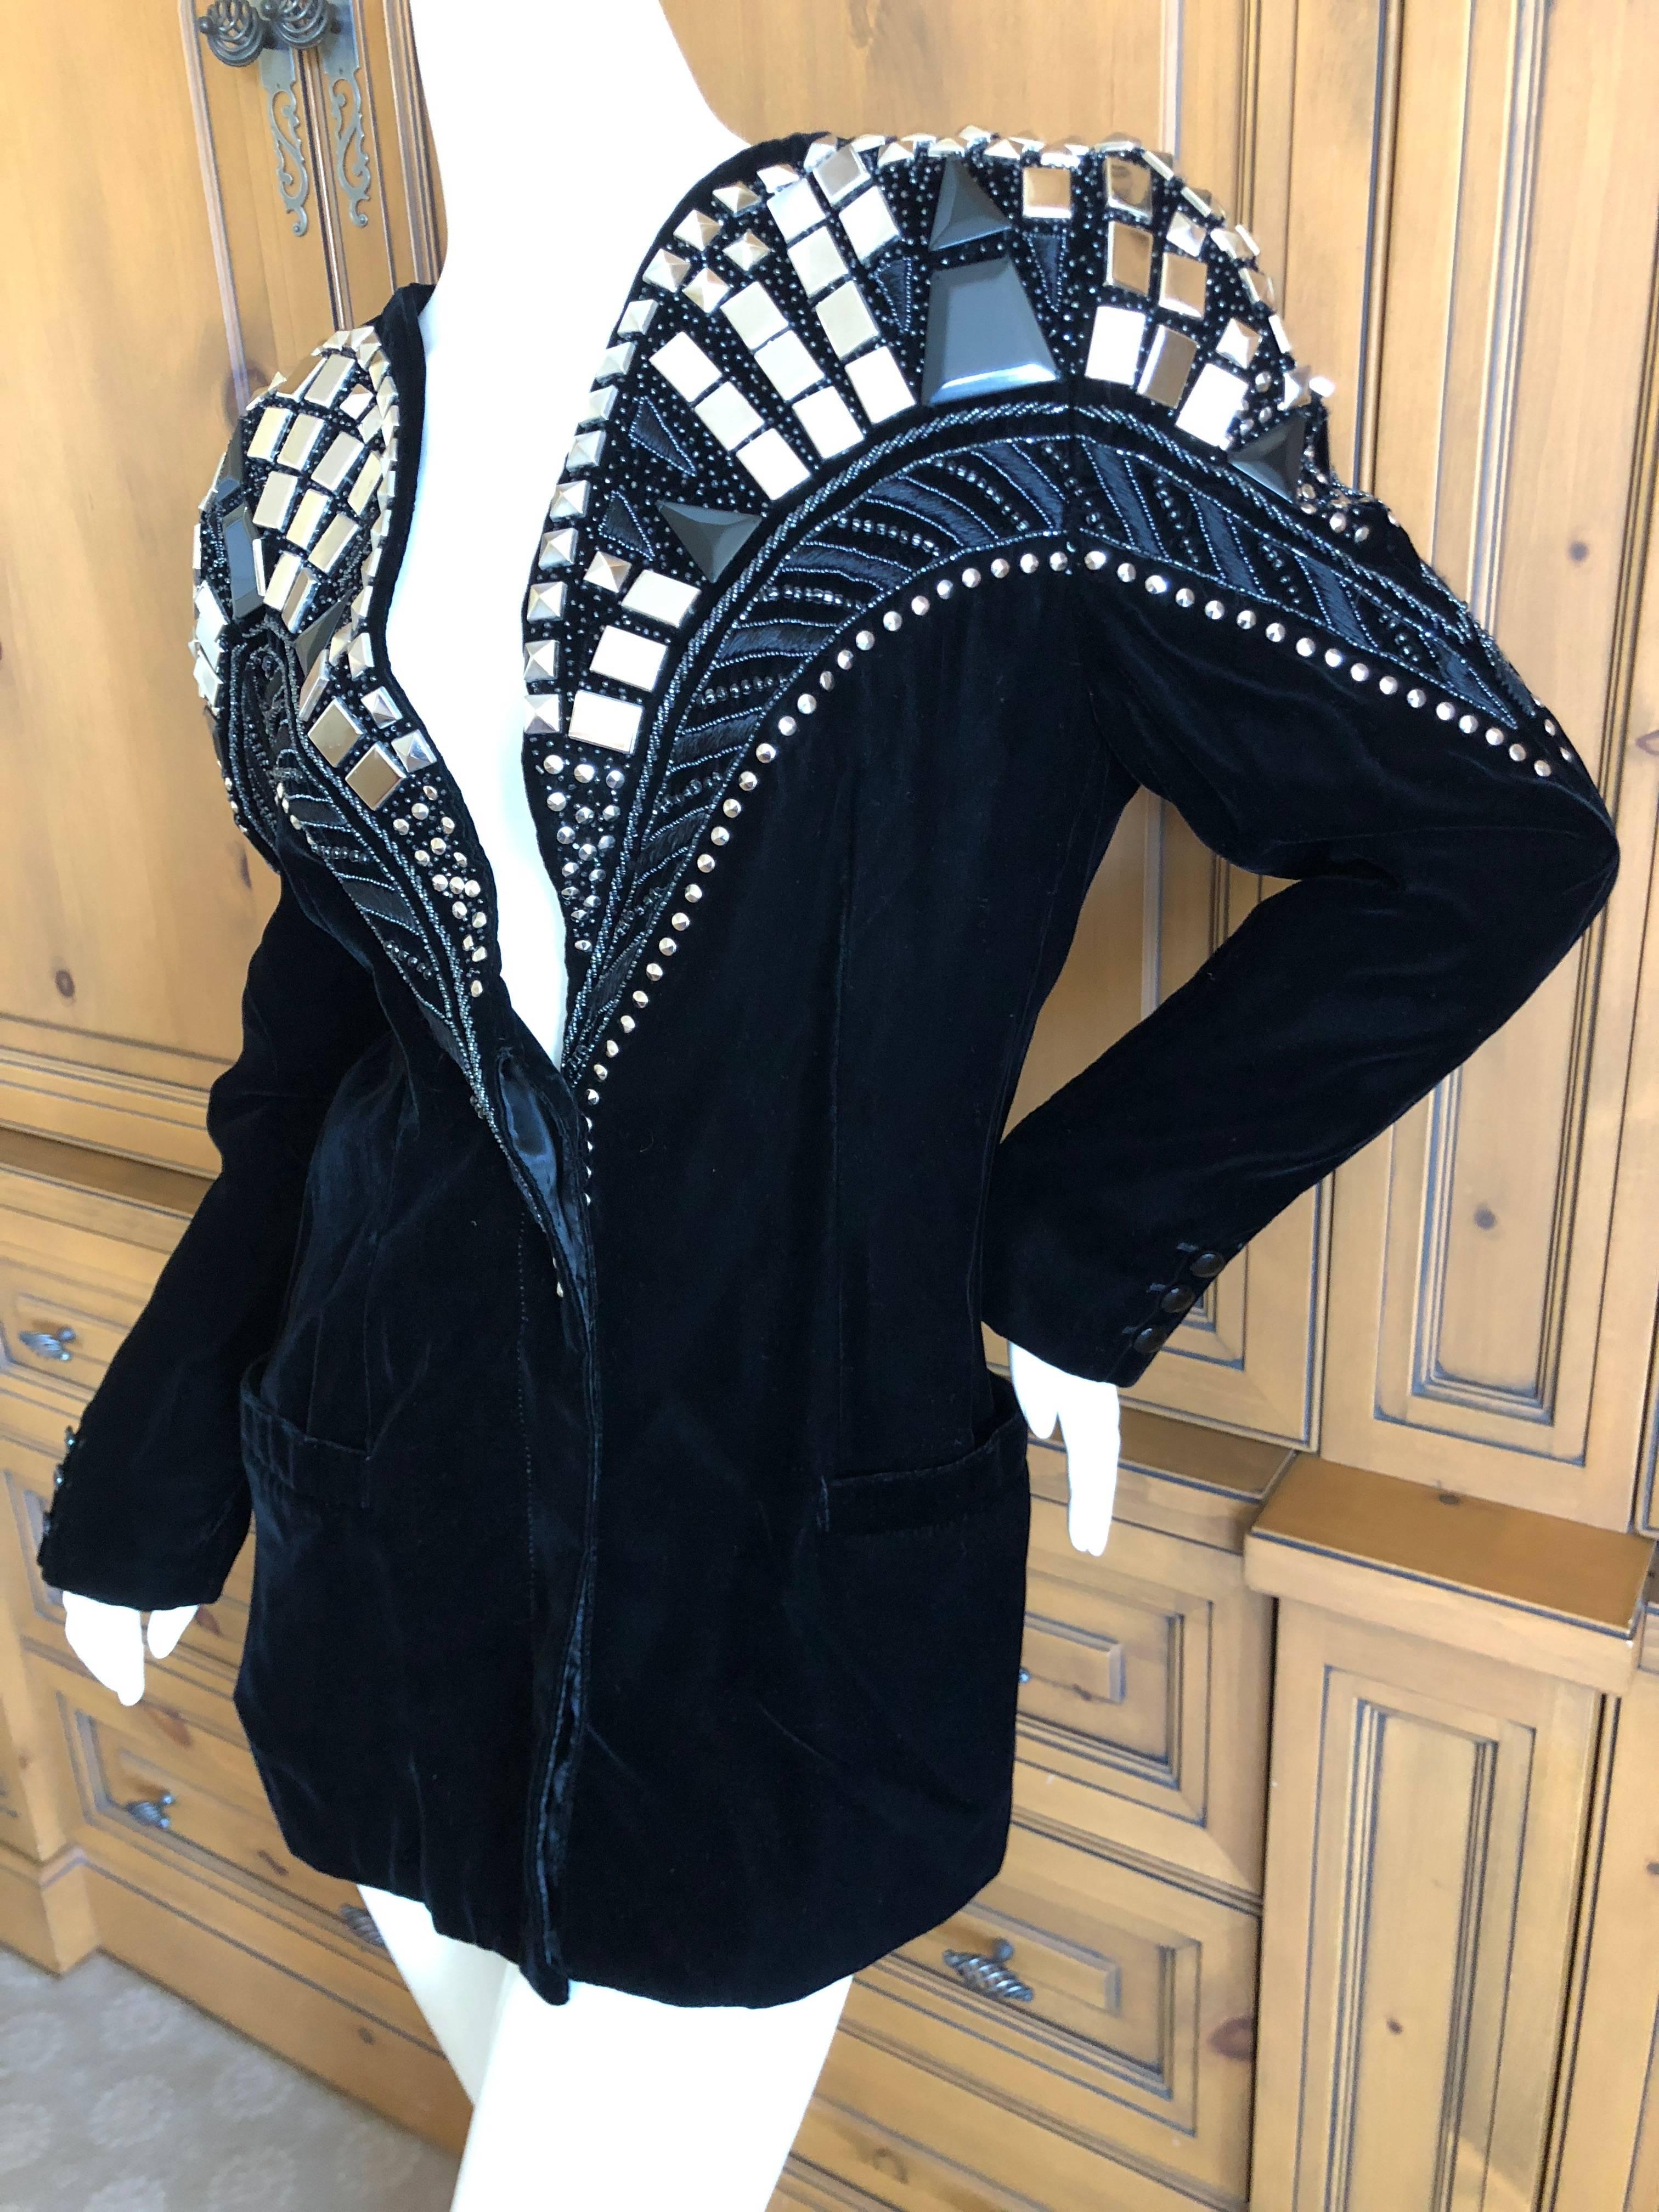 Krizia by Mariuccia Mandelli 1980's Chrysler Building Studded Velvet Jacket  In Excellent Condition For Sale In Cloverdale, CA